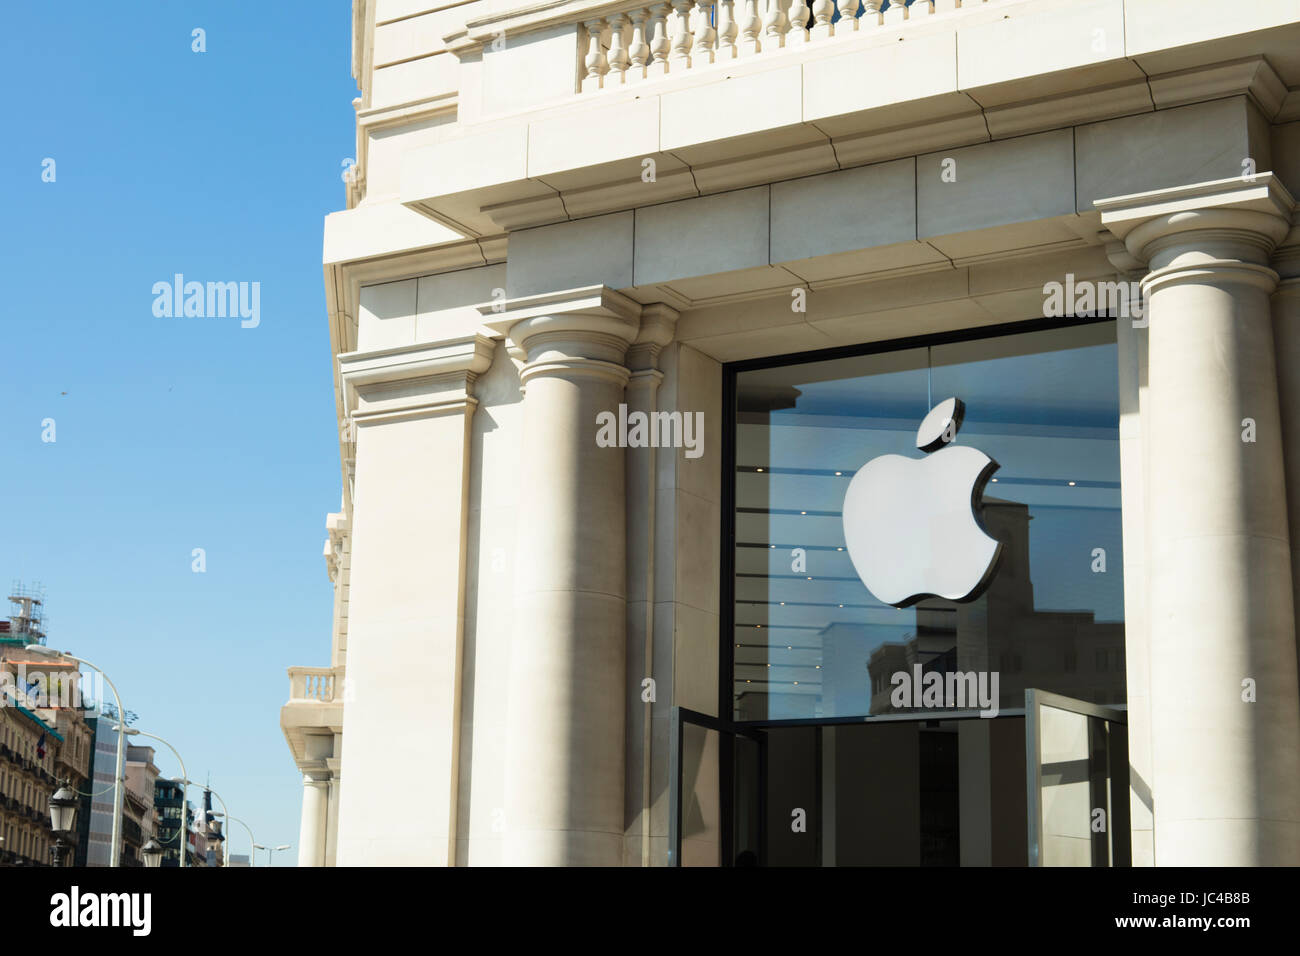 Barcelona, Spain - September 28, 2016: Apple Store At Catalonia Square (Plaza Catalunya) in Barcelona in a neoclassic architecture building. Stock Photo